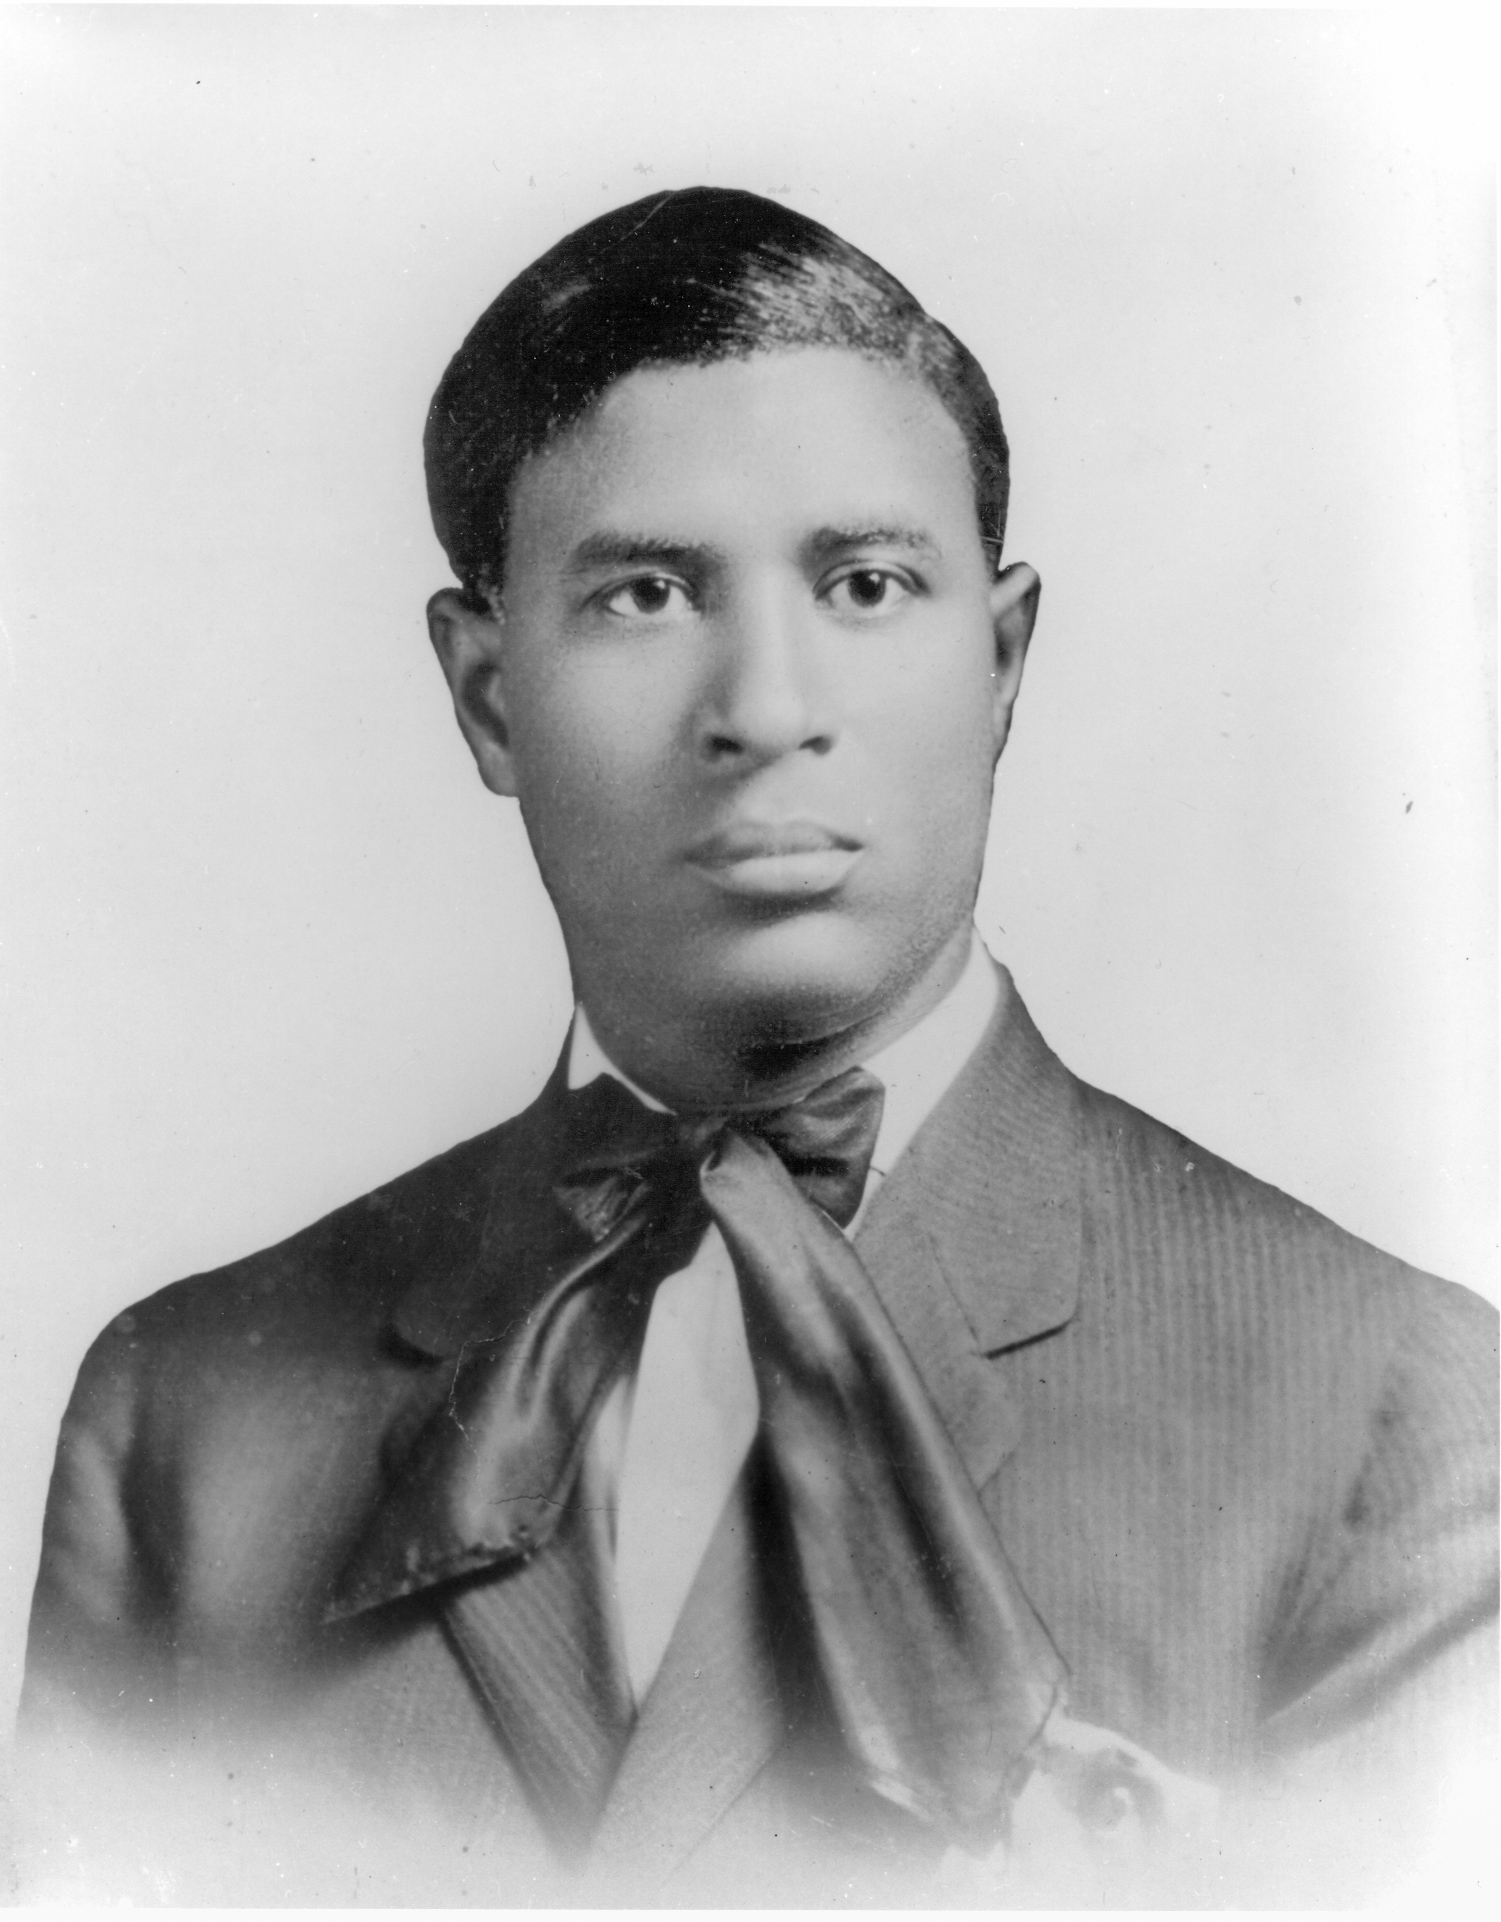 Portrait of a young Garrett Morgan wearing a suit and silk tie